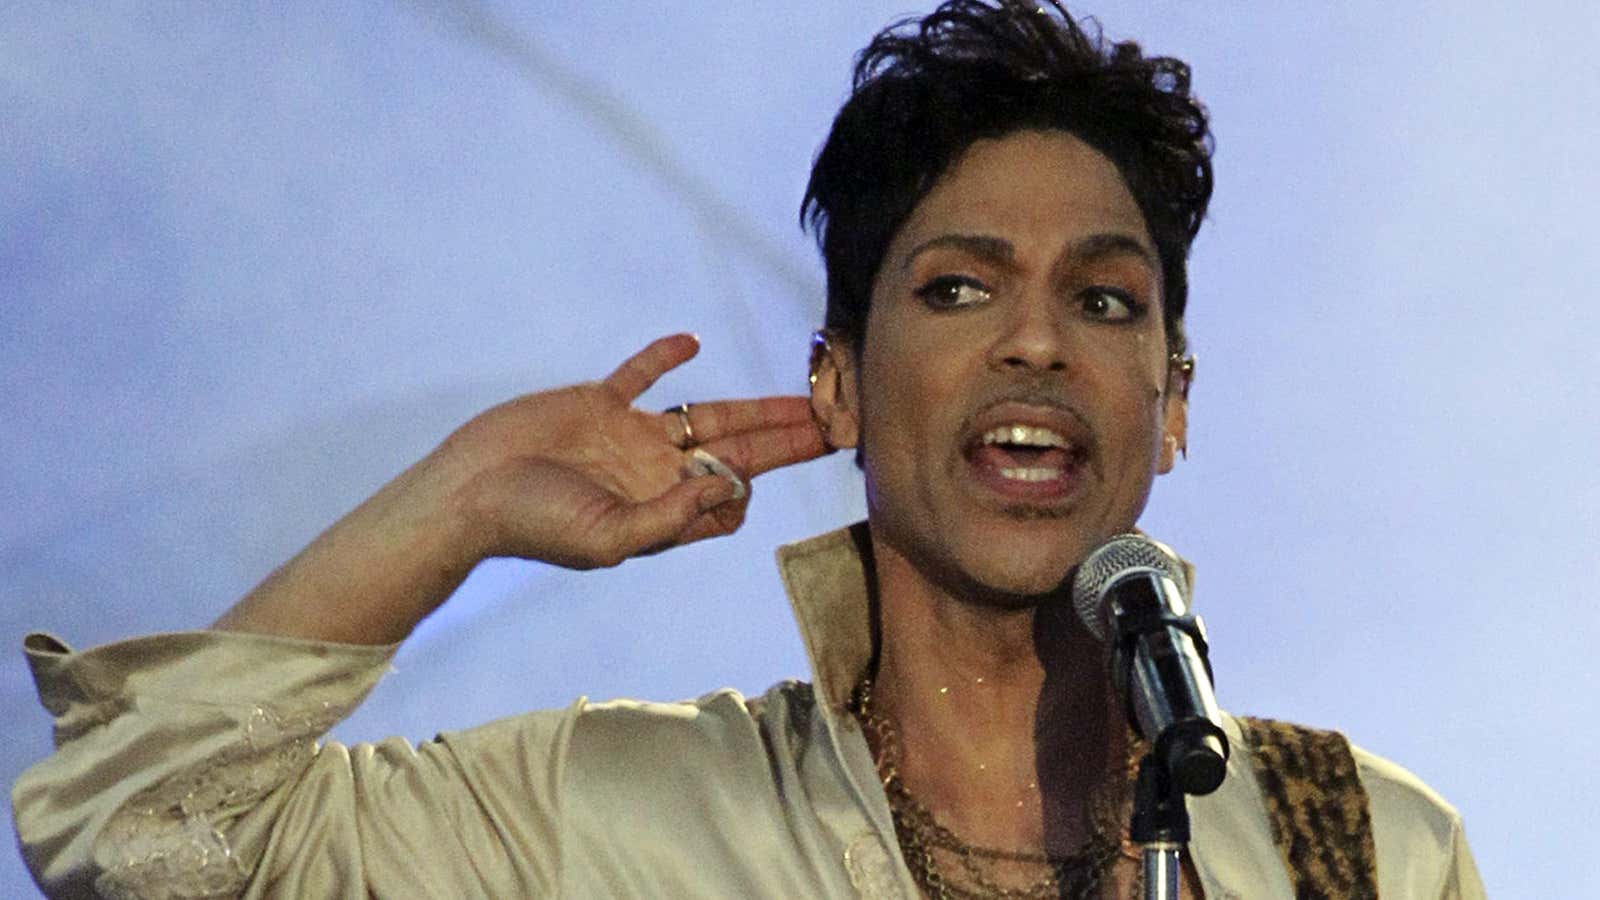 Prince in 2011.